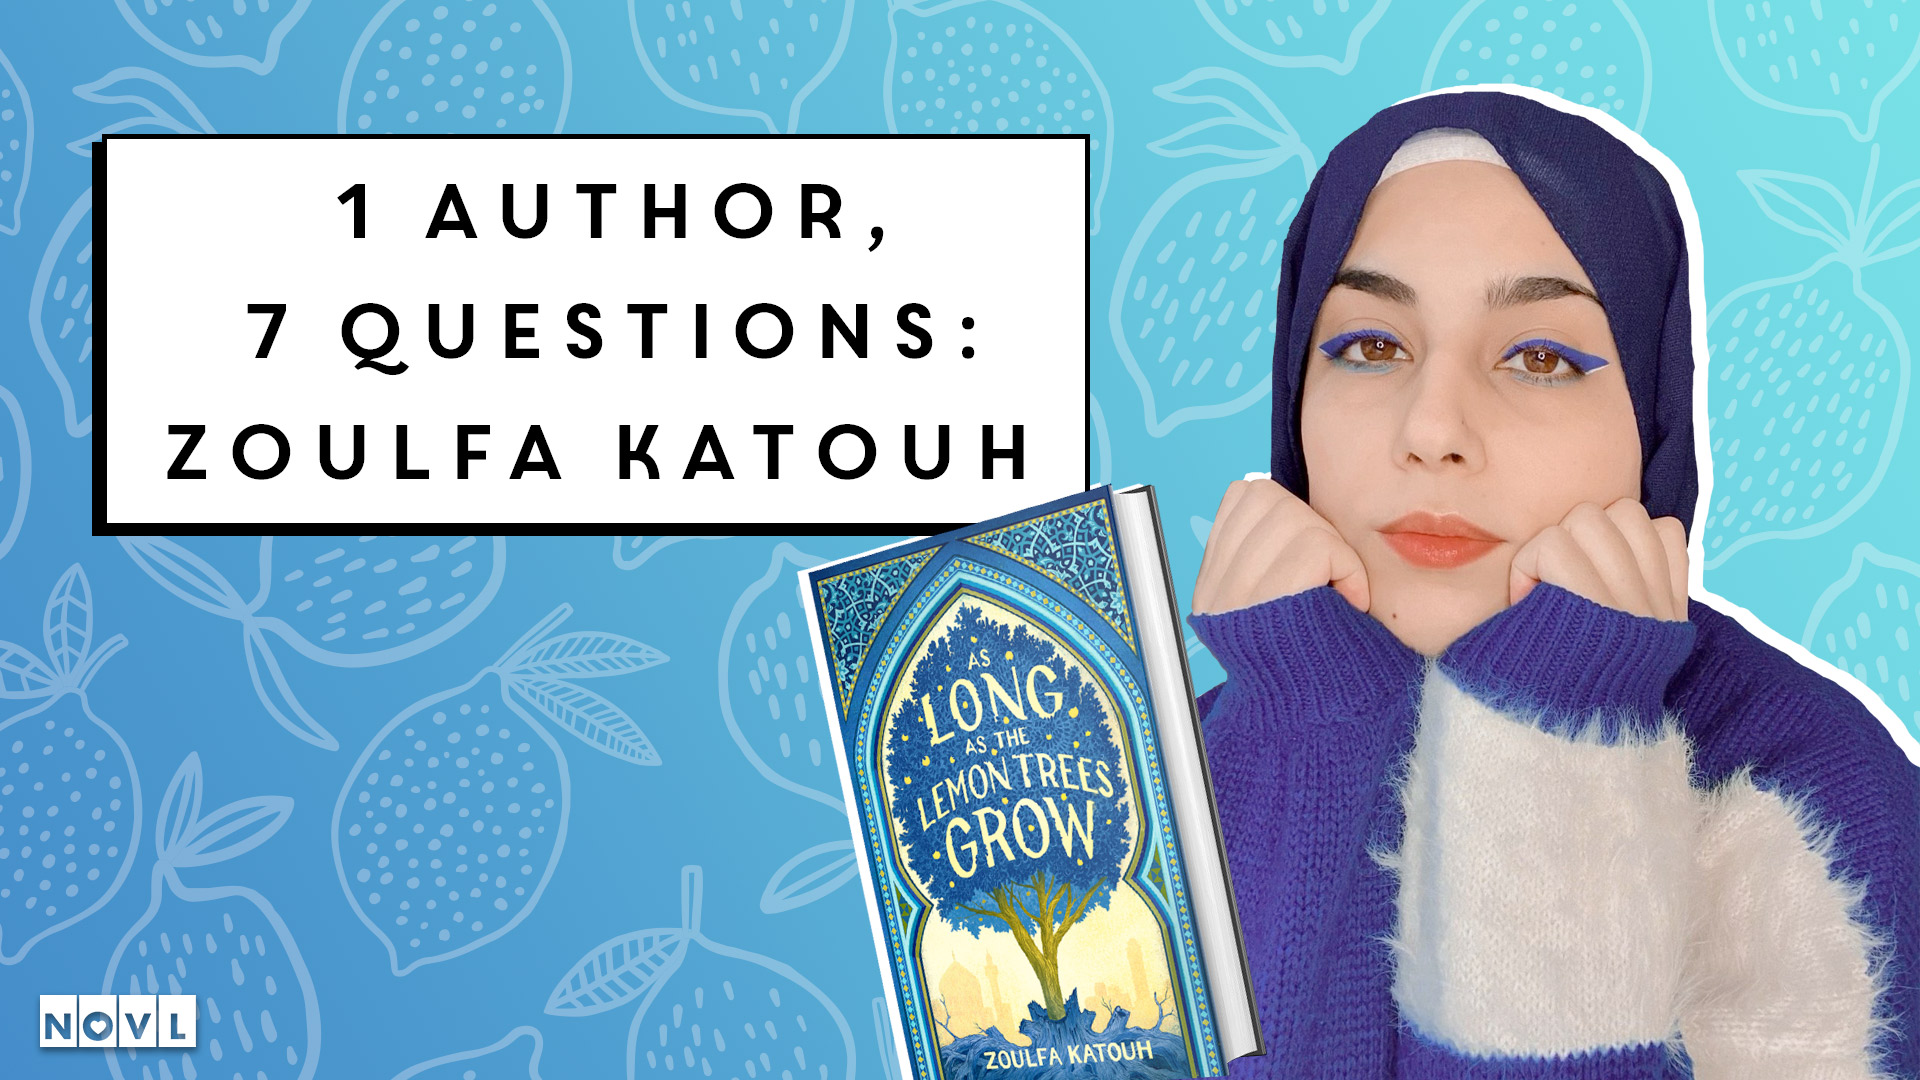 The NOVL Blog, Featured Image for Article: 1 Author, 7 Questions: Zoulfa Katouh